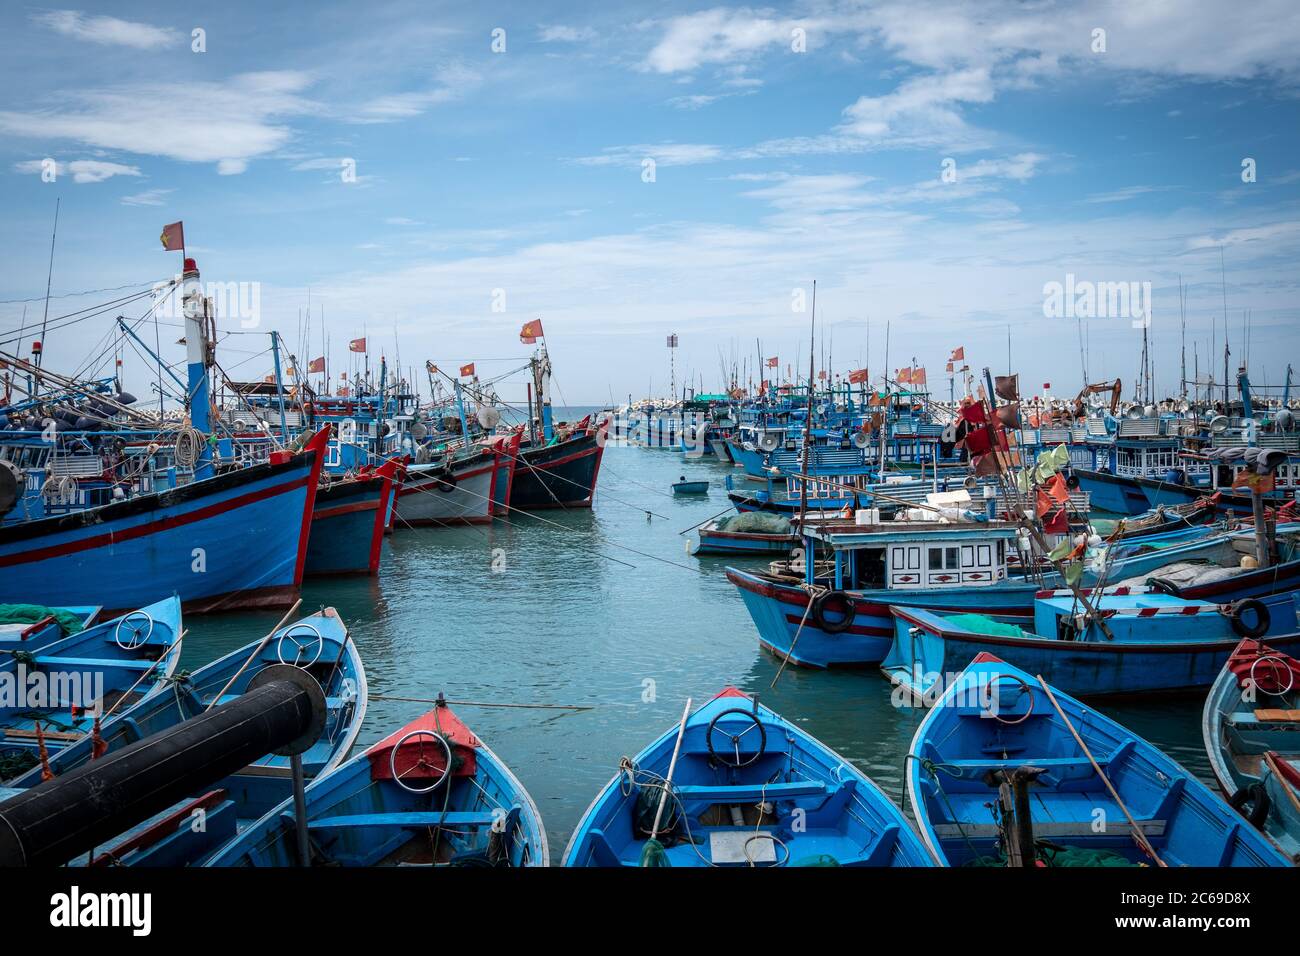 Traditional fishing boats moored in a harbour, Vietnam Stock Photo